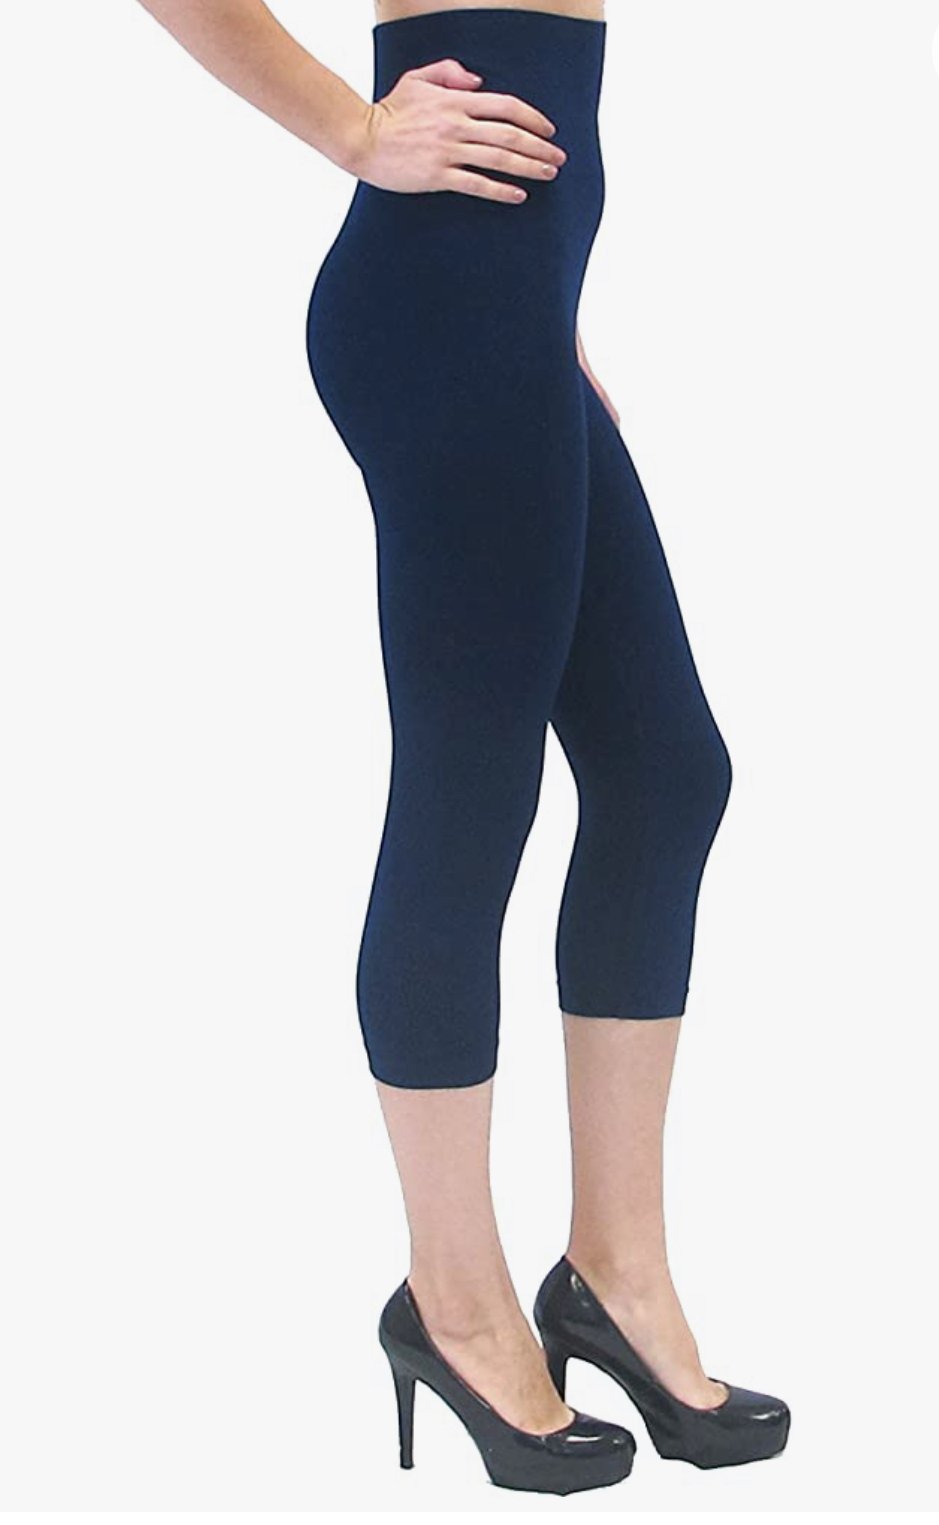 Collections Etc Women's Button Accent Cinched Capri Leggings for Pairing  with Tunics & Tops, Navy, Medium at  Women's Clothing store